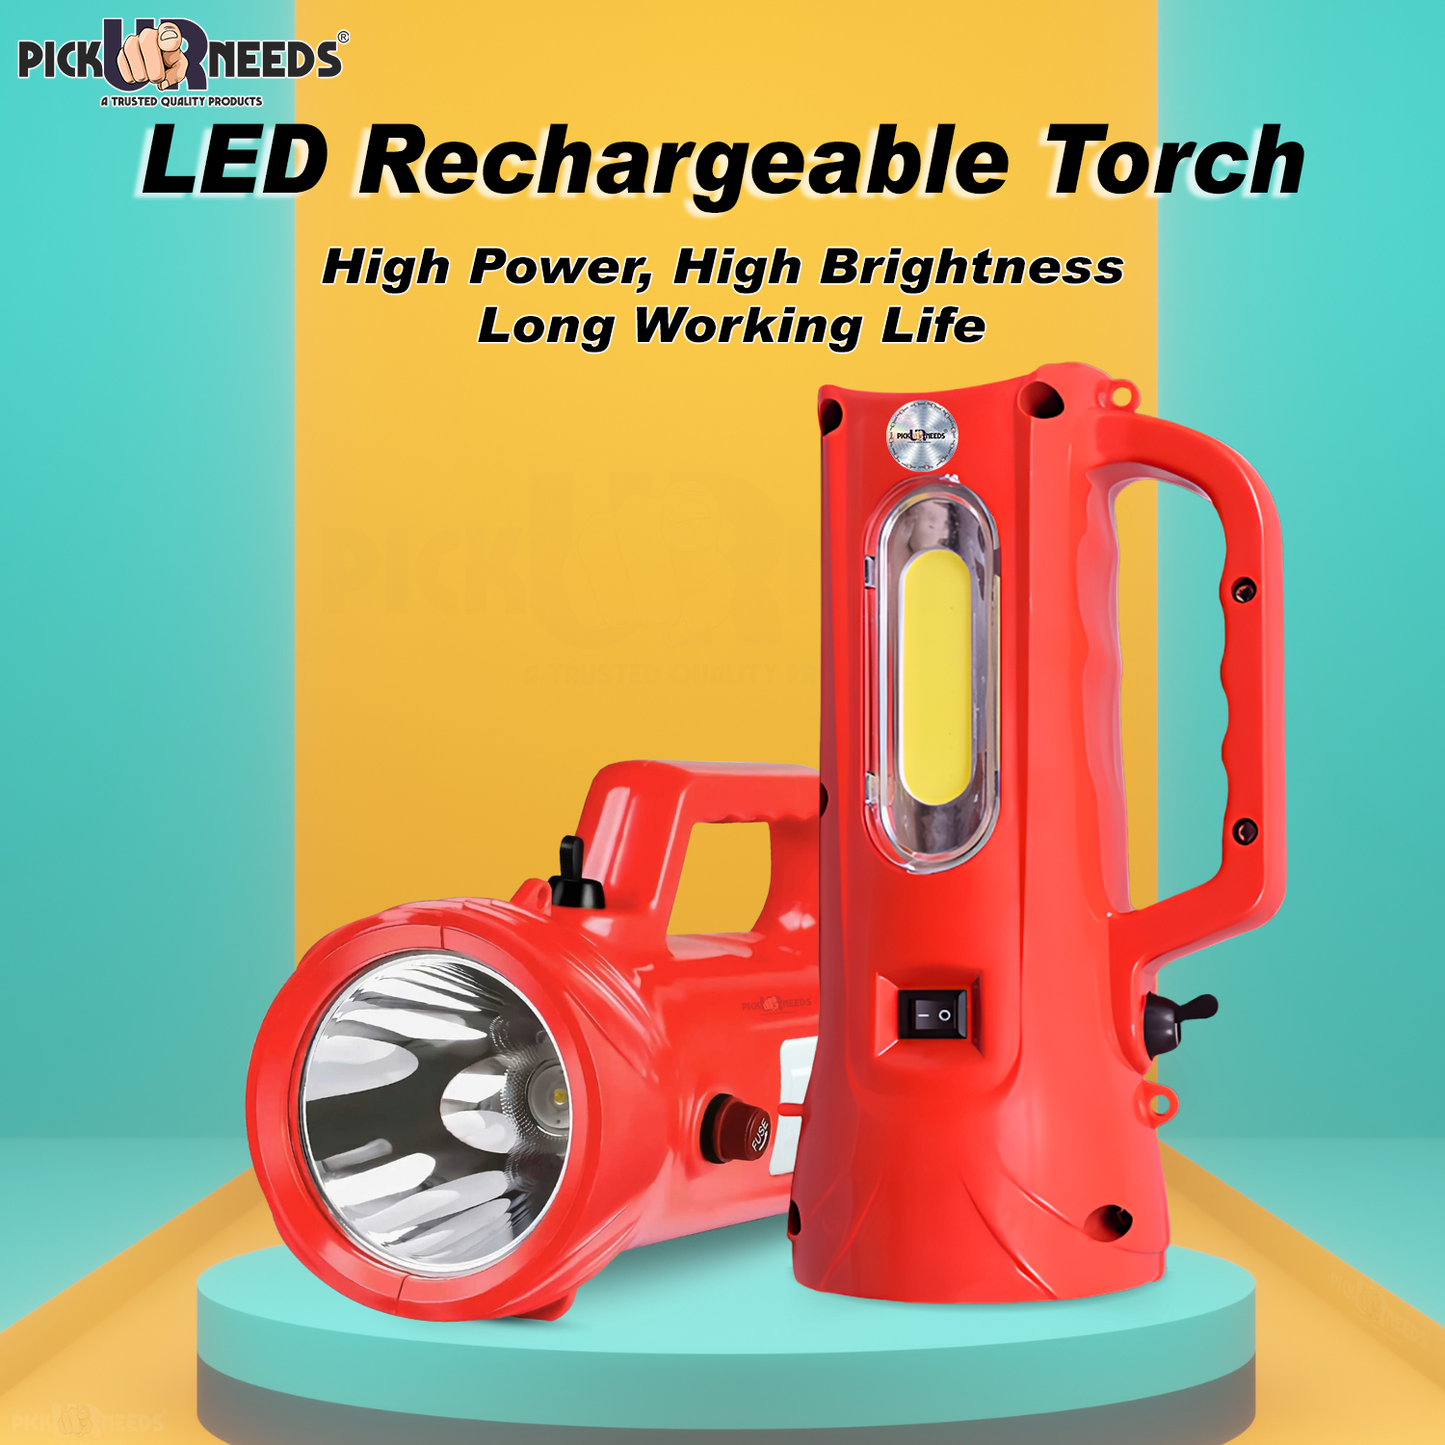 Pick Ur Needs Emergency Rechargable Torch Long Range Search Light 150W+Side COB 6 hrs Torch